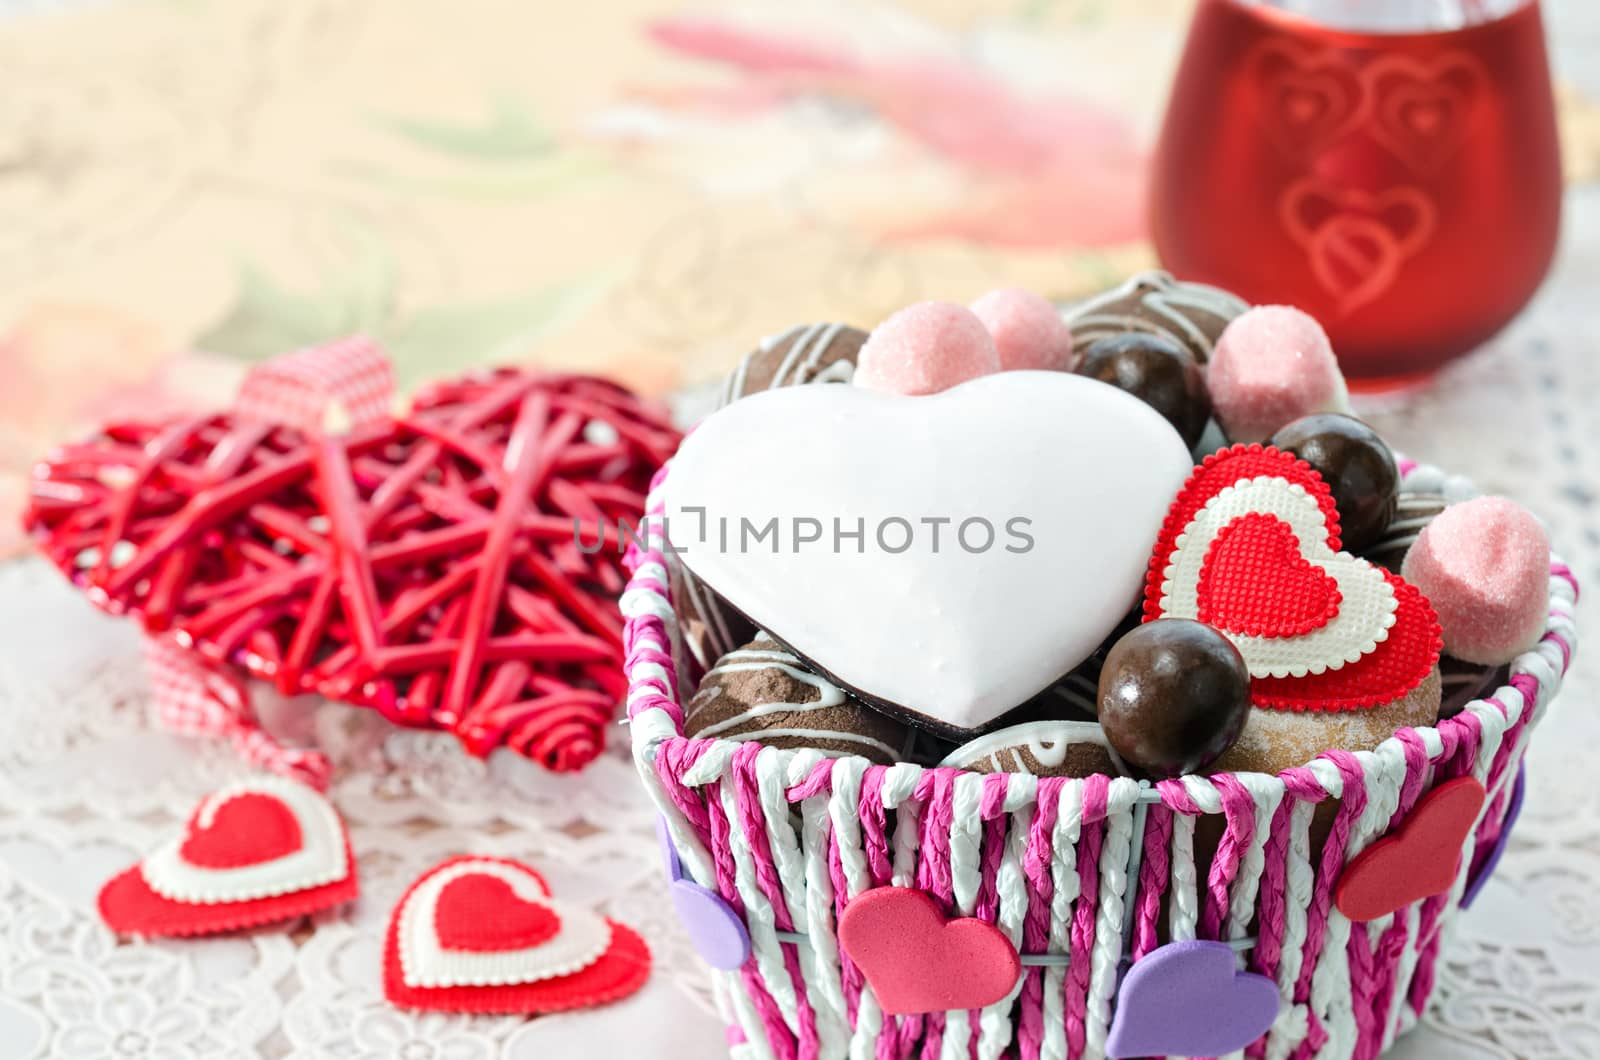 Colorful basket with sweets and biscuits on the table, decorative Valentine day heart by Gaina